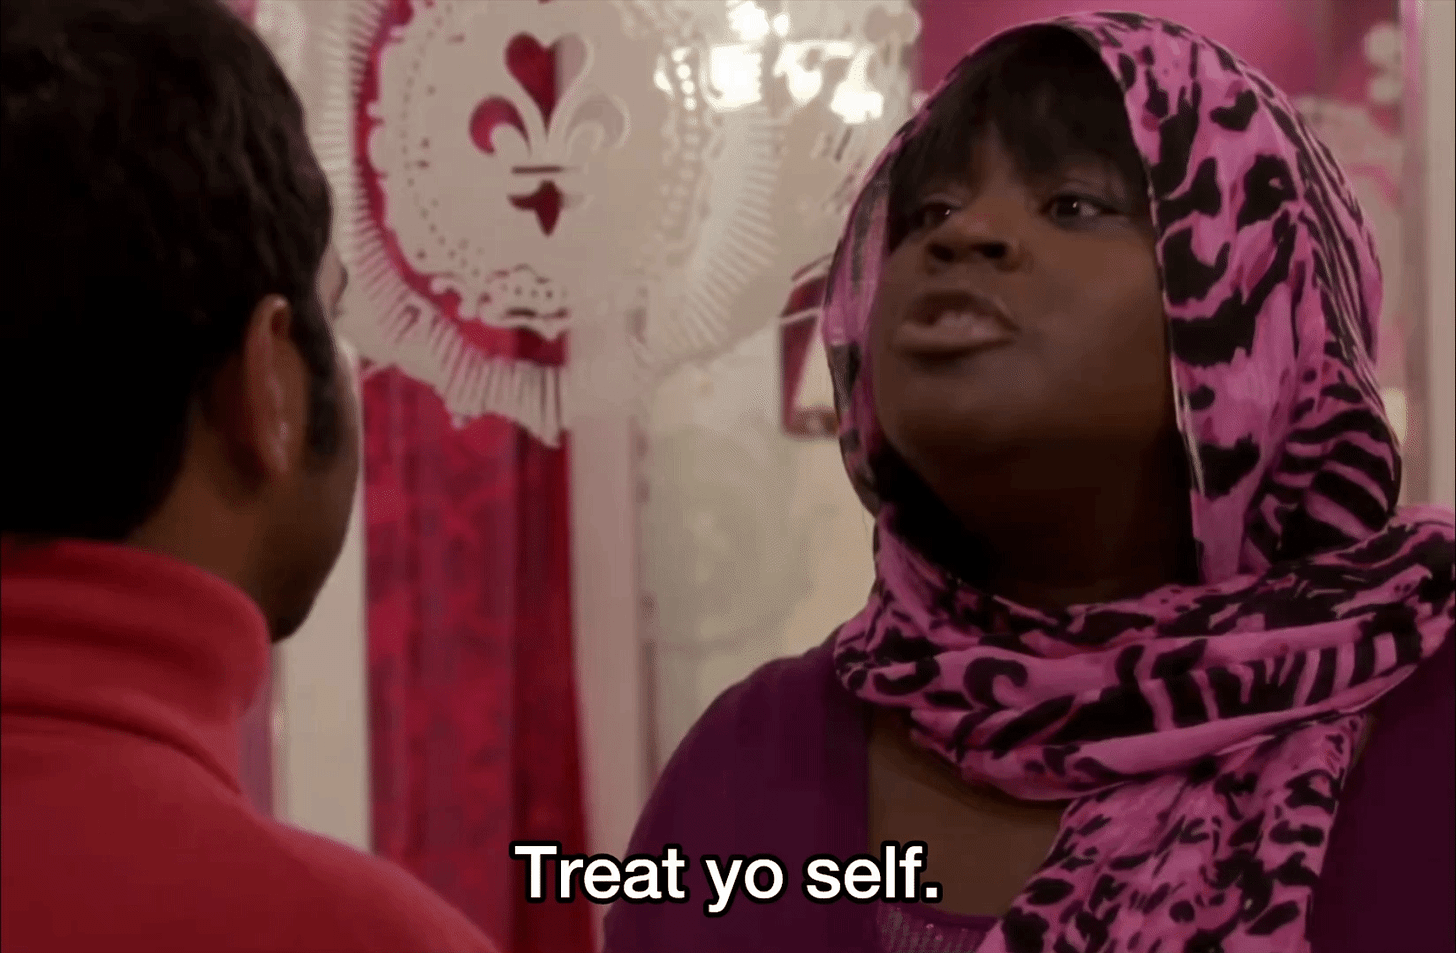 A gif of Donna Meagle from the TV show "Parks and Recreation" saying "Treat yo self."